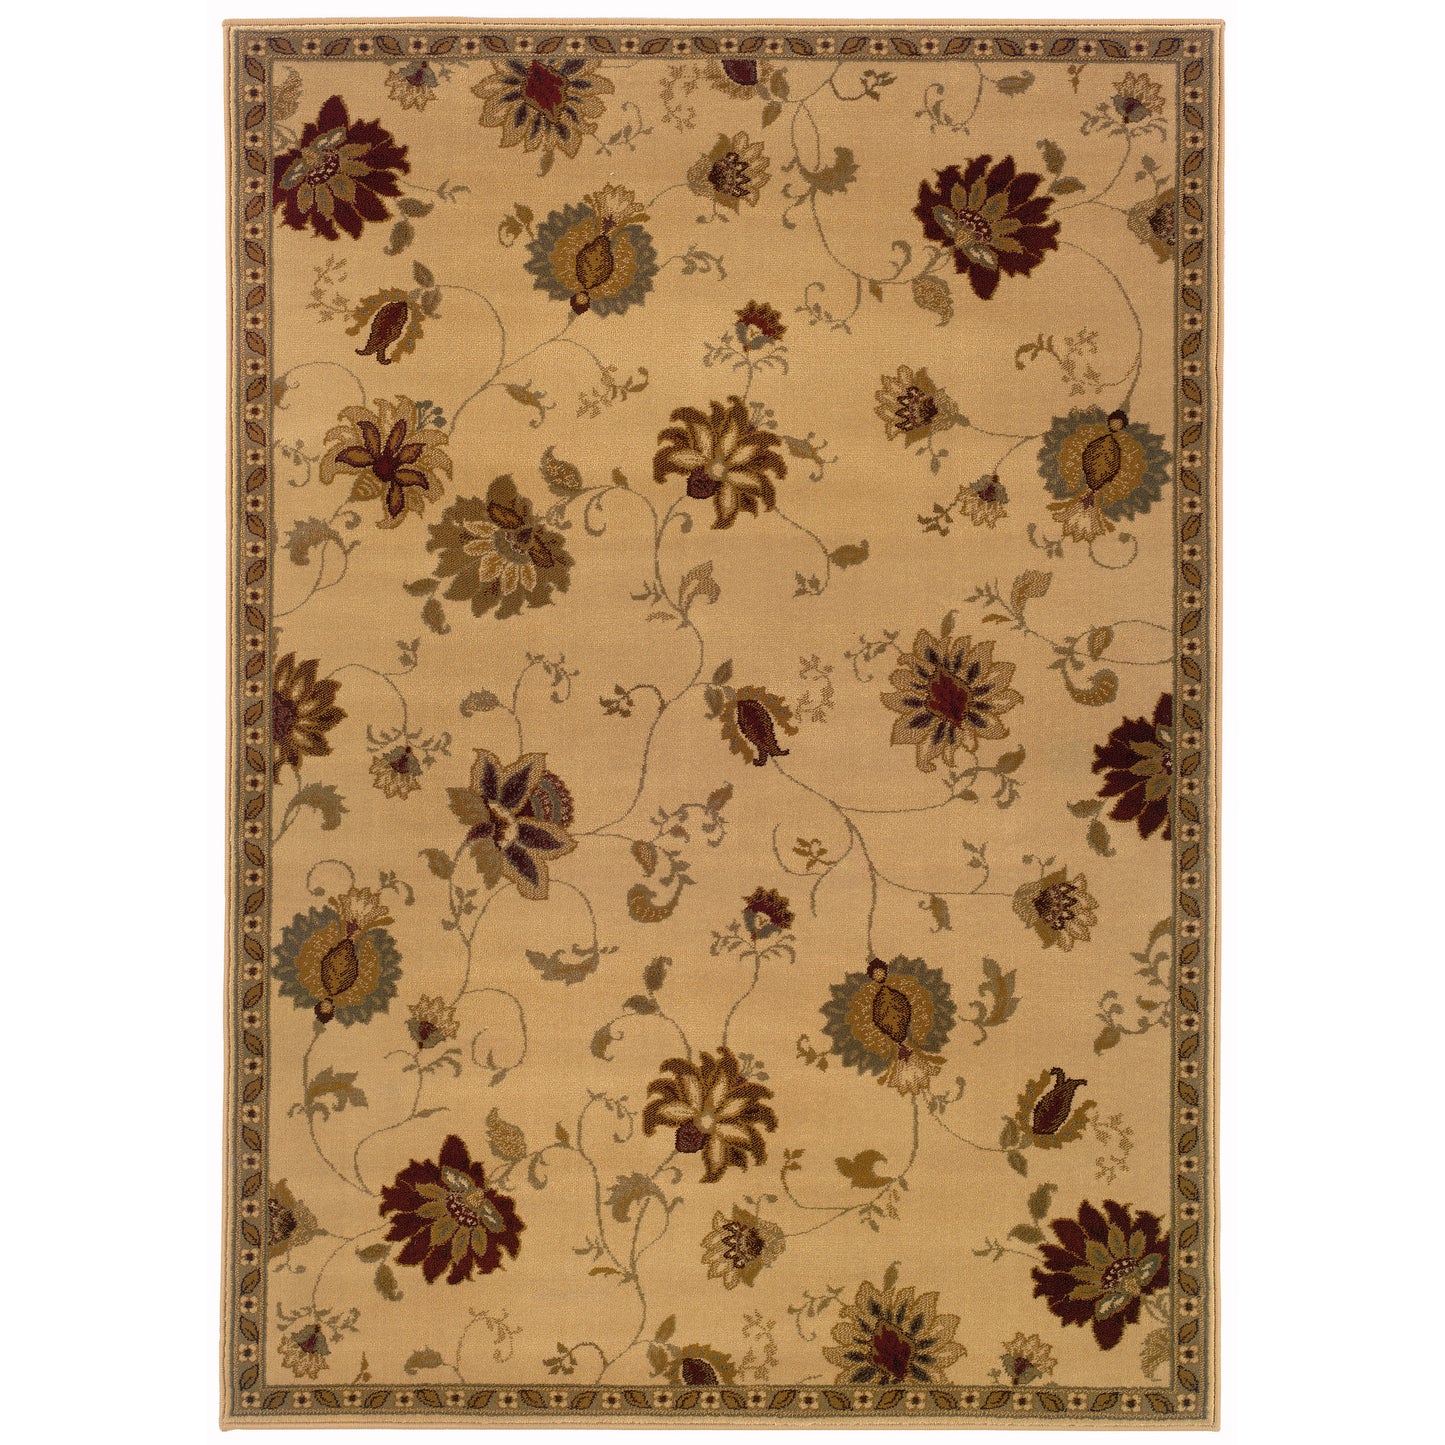 AMELIA Floral Power-Loomed Synthetic Blend Indoor Area Rug by Oriental Weavers